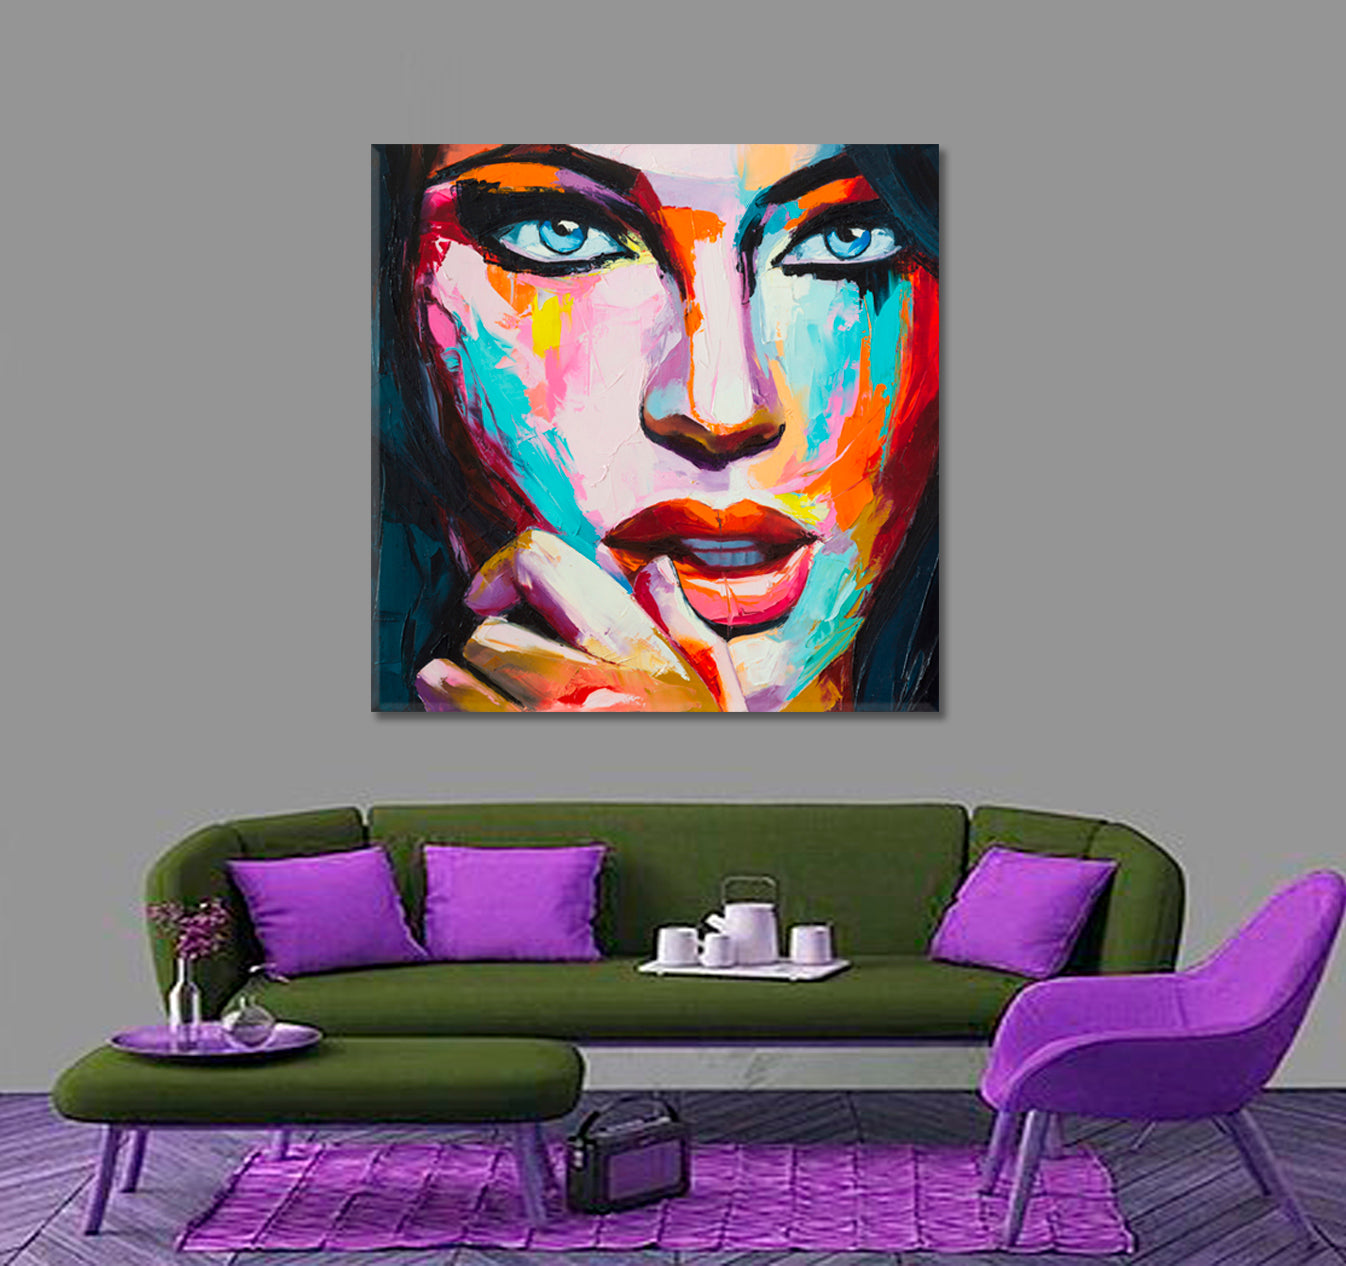 MIX OF FEELINGS  Beautiful Woman Inspired by History Myths Legends Human Emotions -  Square Panel People Portrait Wall Hangings Artesty   